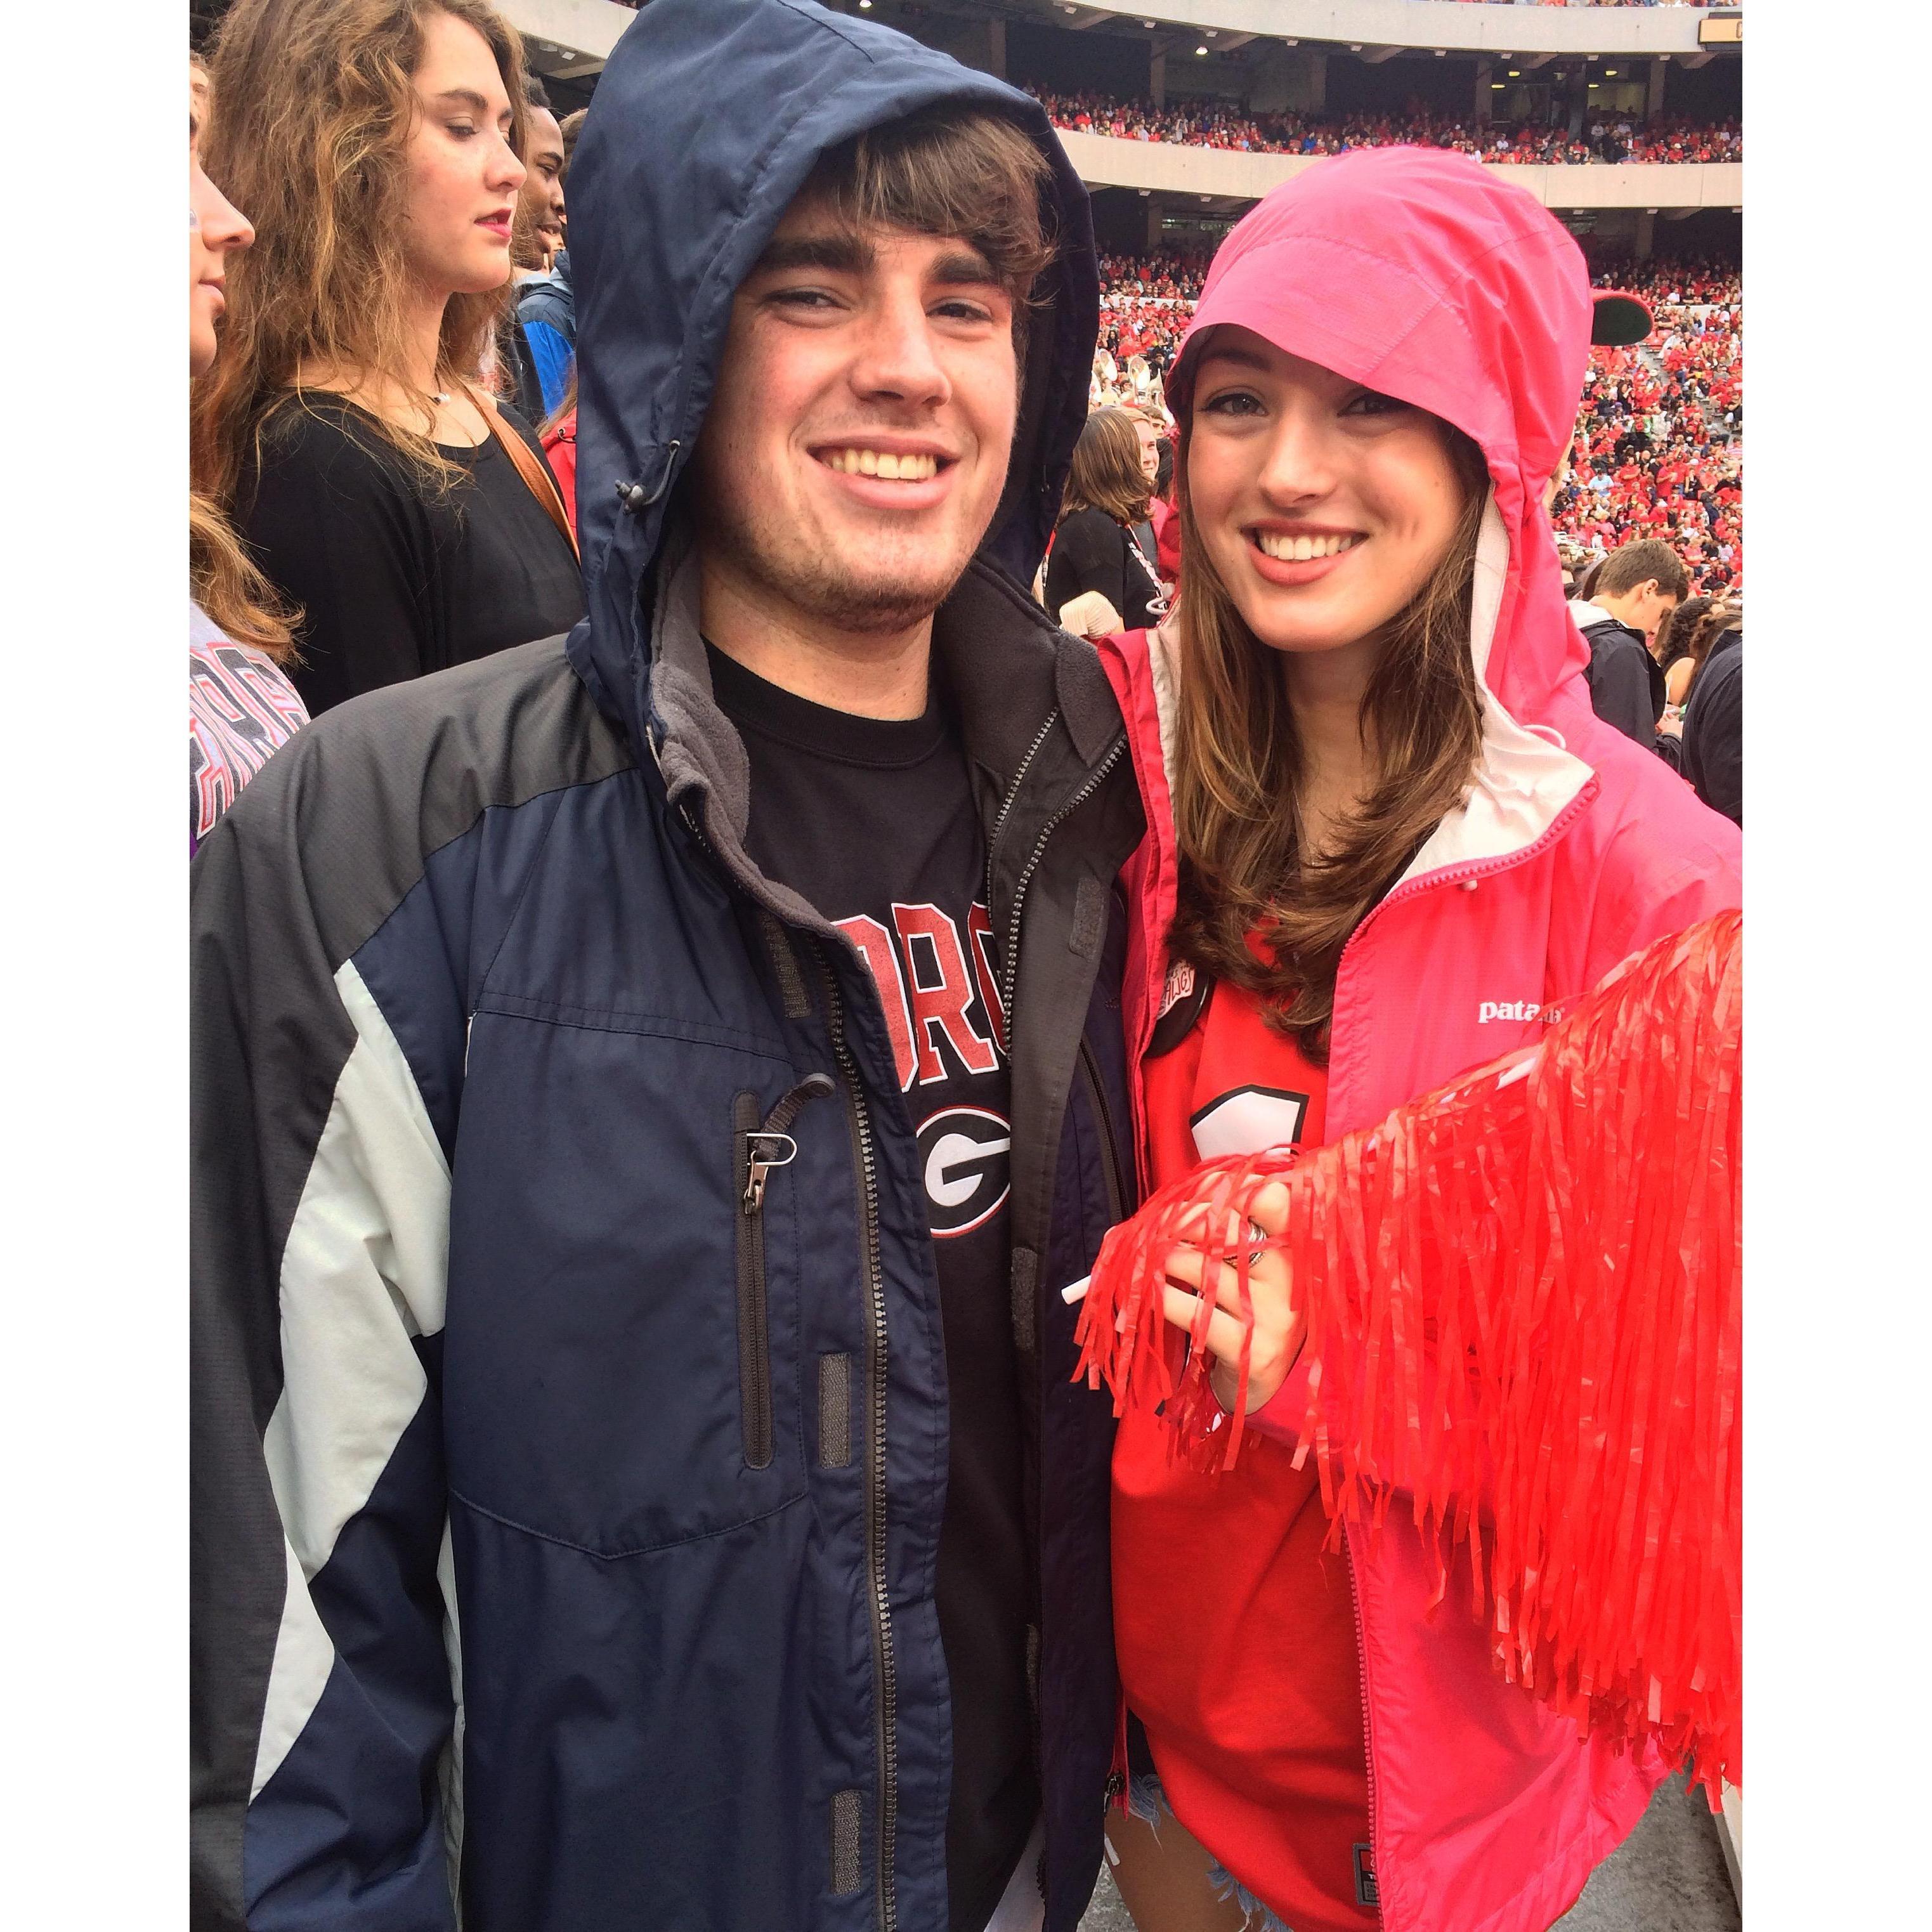 One of our first UGA games together